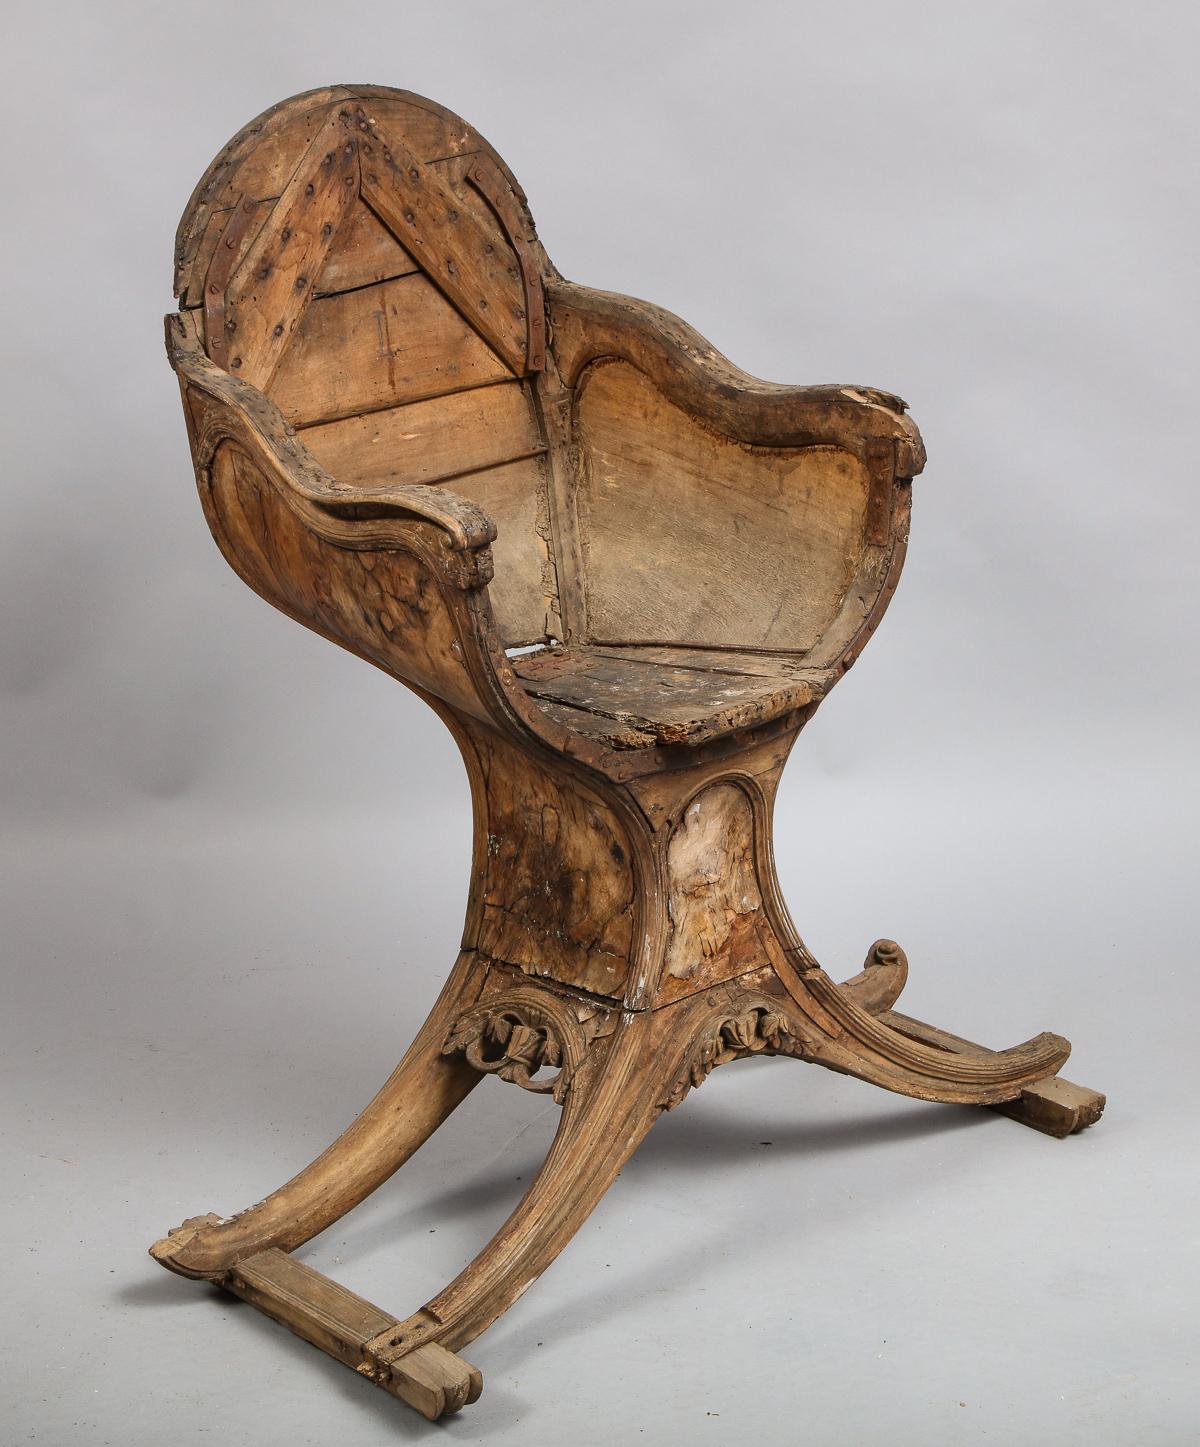 Rare 18th century Venetian gondola chair in perfect state of decay, now lacking upholstery, much loss to burl walnut veneer and carved solid walnut elements, the seat with lift up compartment for valuables, standing on spayed legs mounted to